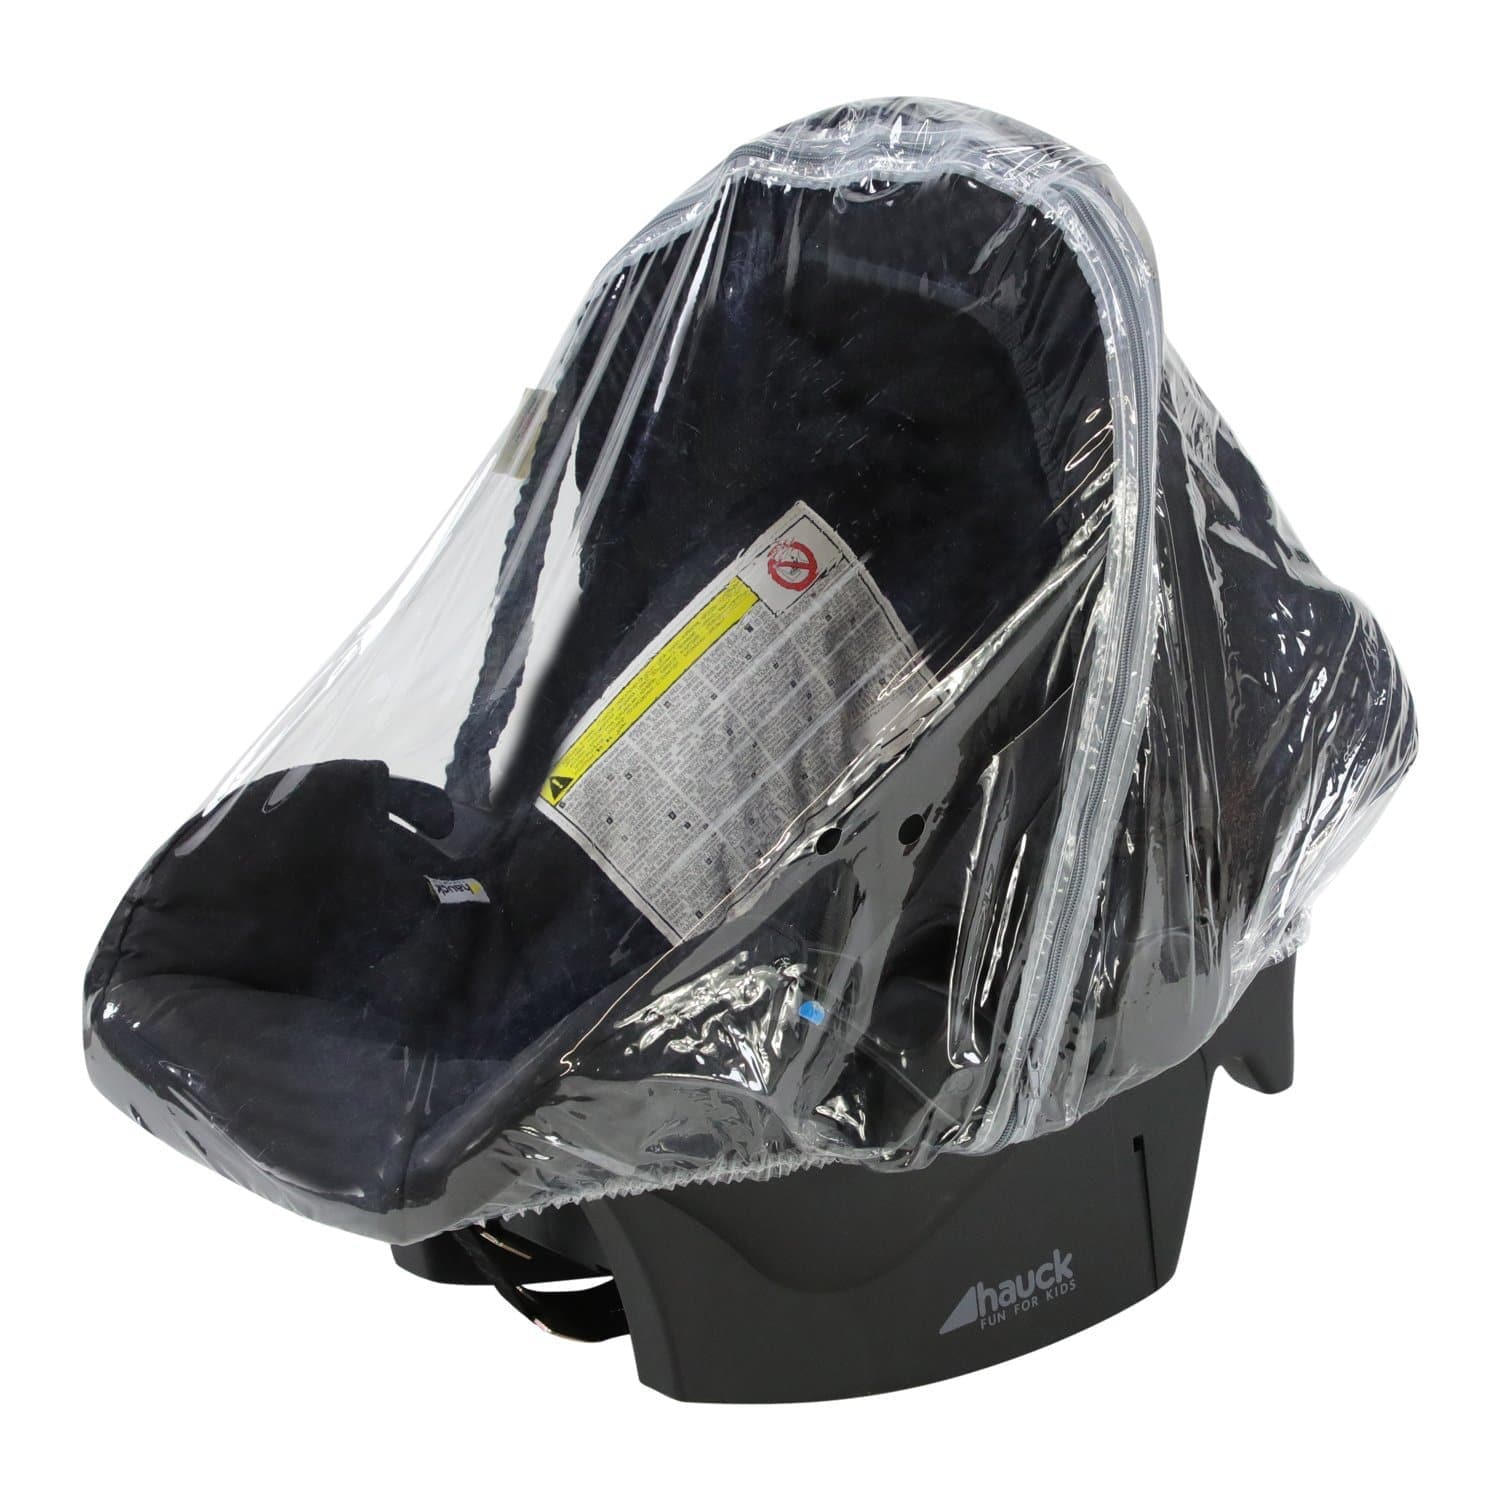 Car Seat Raincover Compatible With Doona - For Your Little One